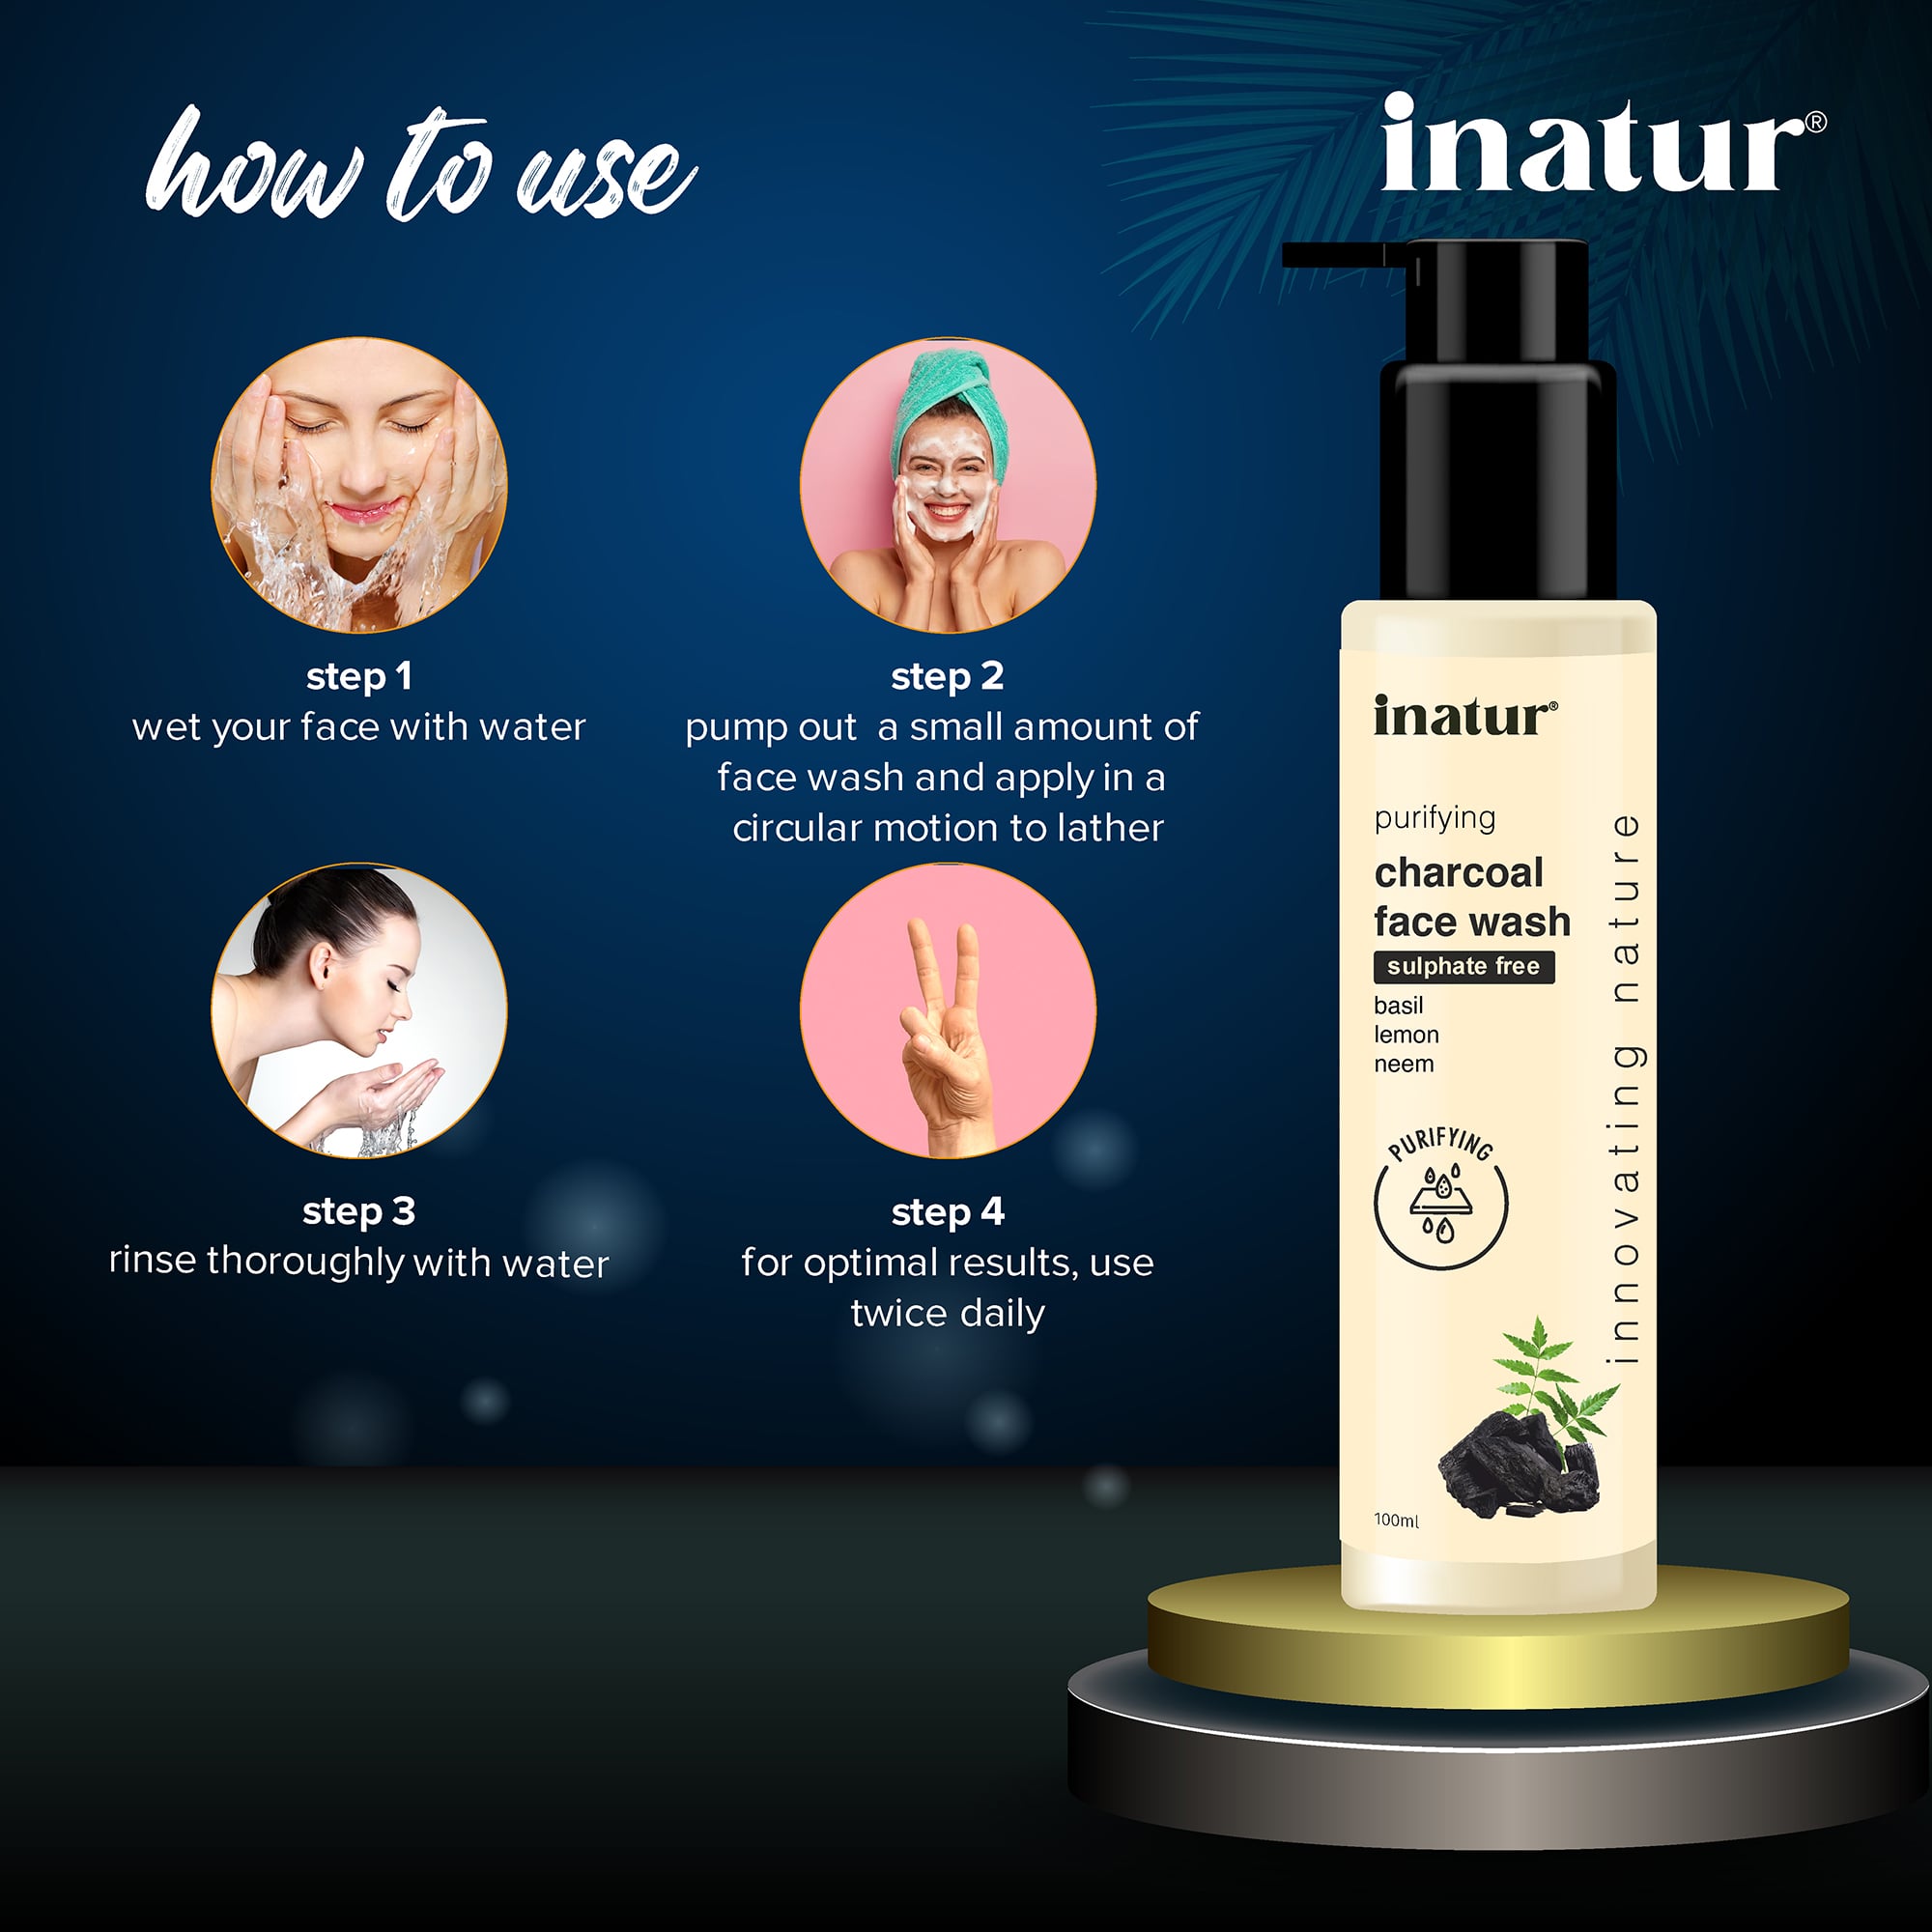 how to use inatur charcoal face wash 100ml